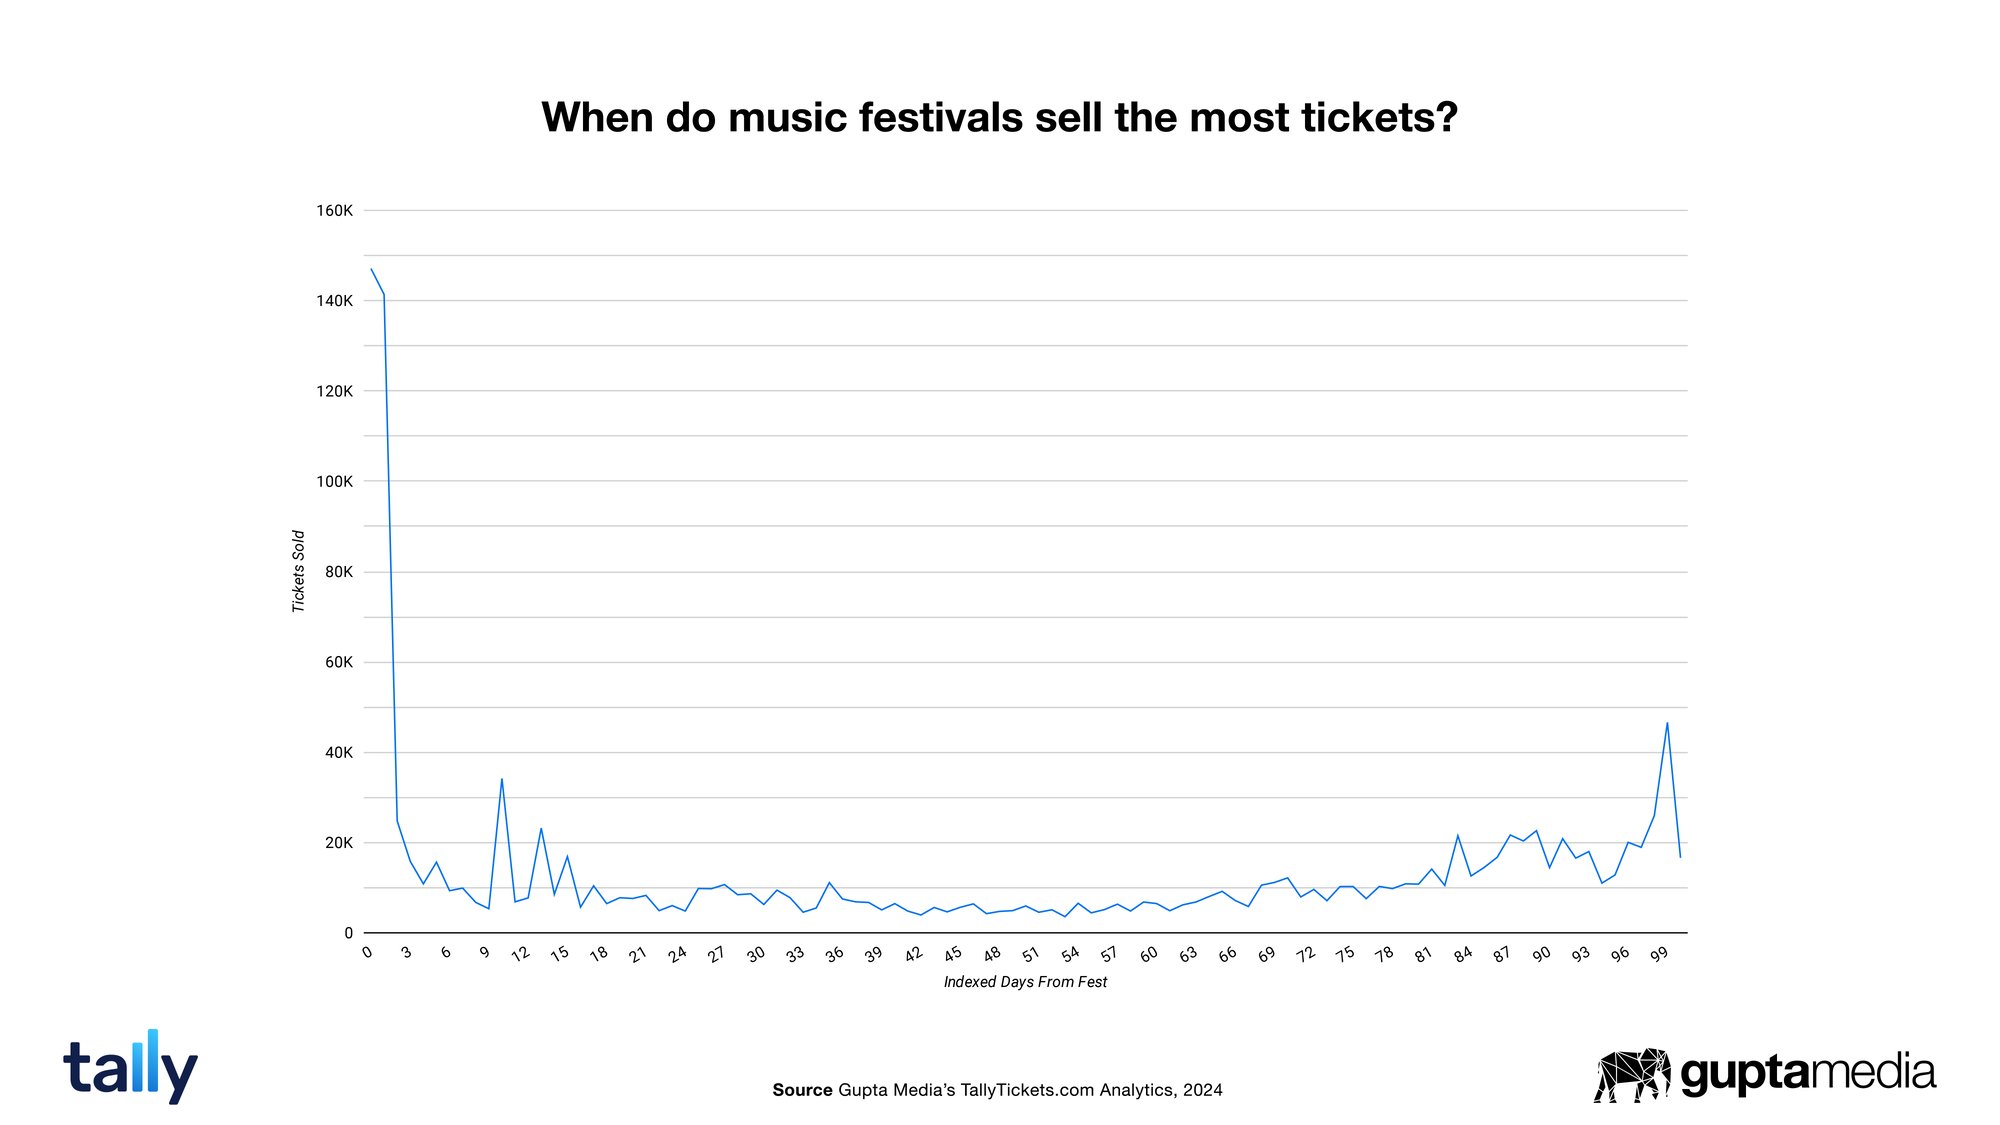 Data: When do music festivals sell the most tickets?